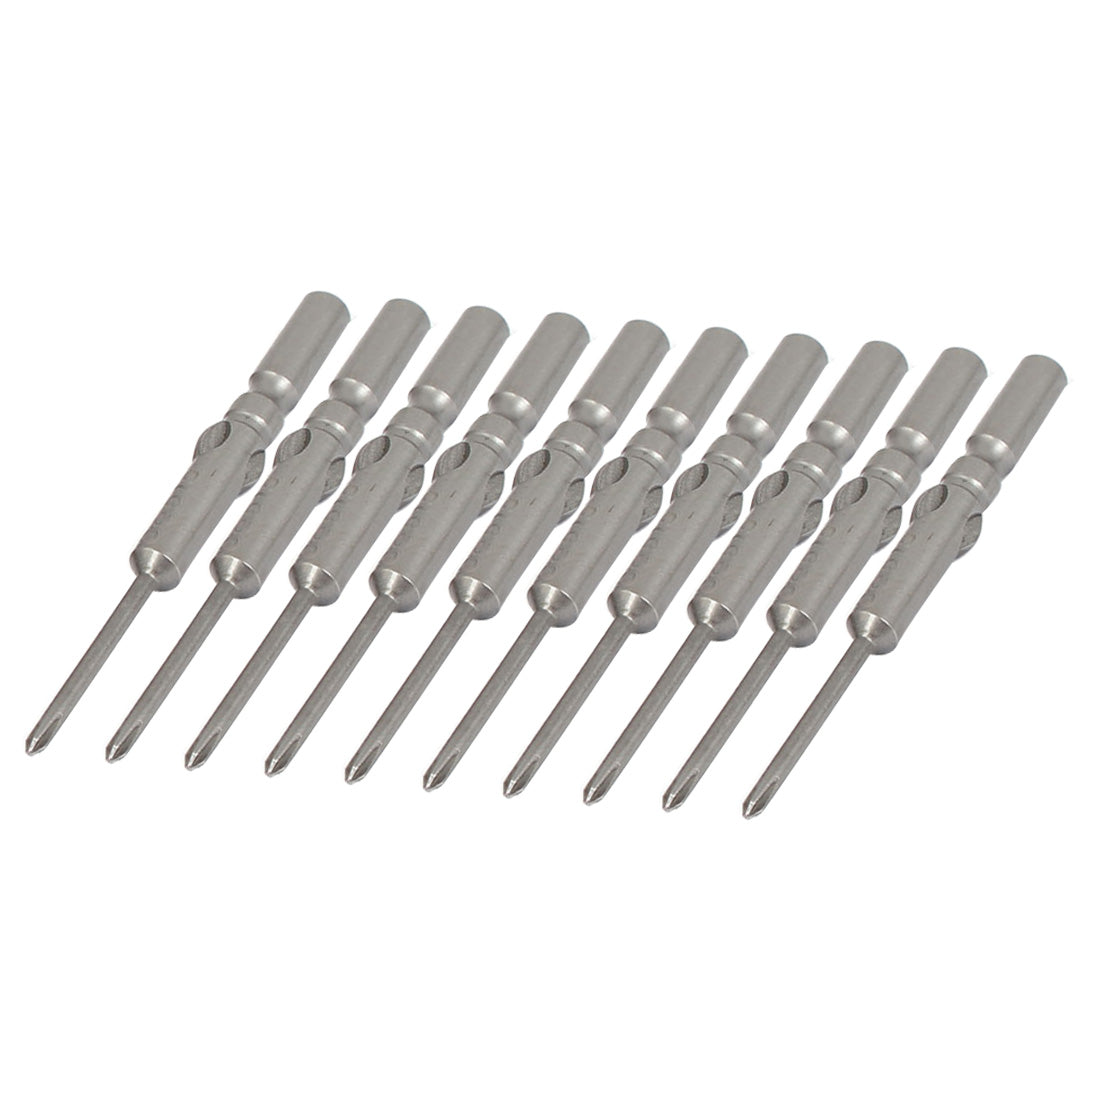 uxcell Uxcell 5mm Round Shank PH0 2mm Magnetic Phillips Screwdriver Bit 60mm Long 10pcs